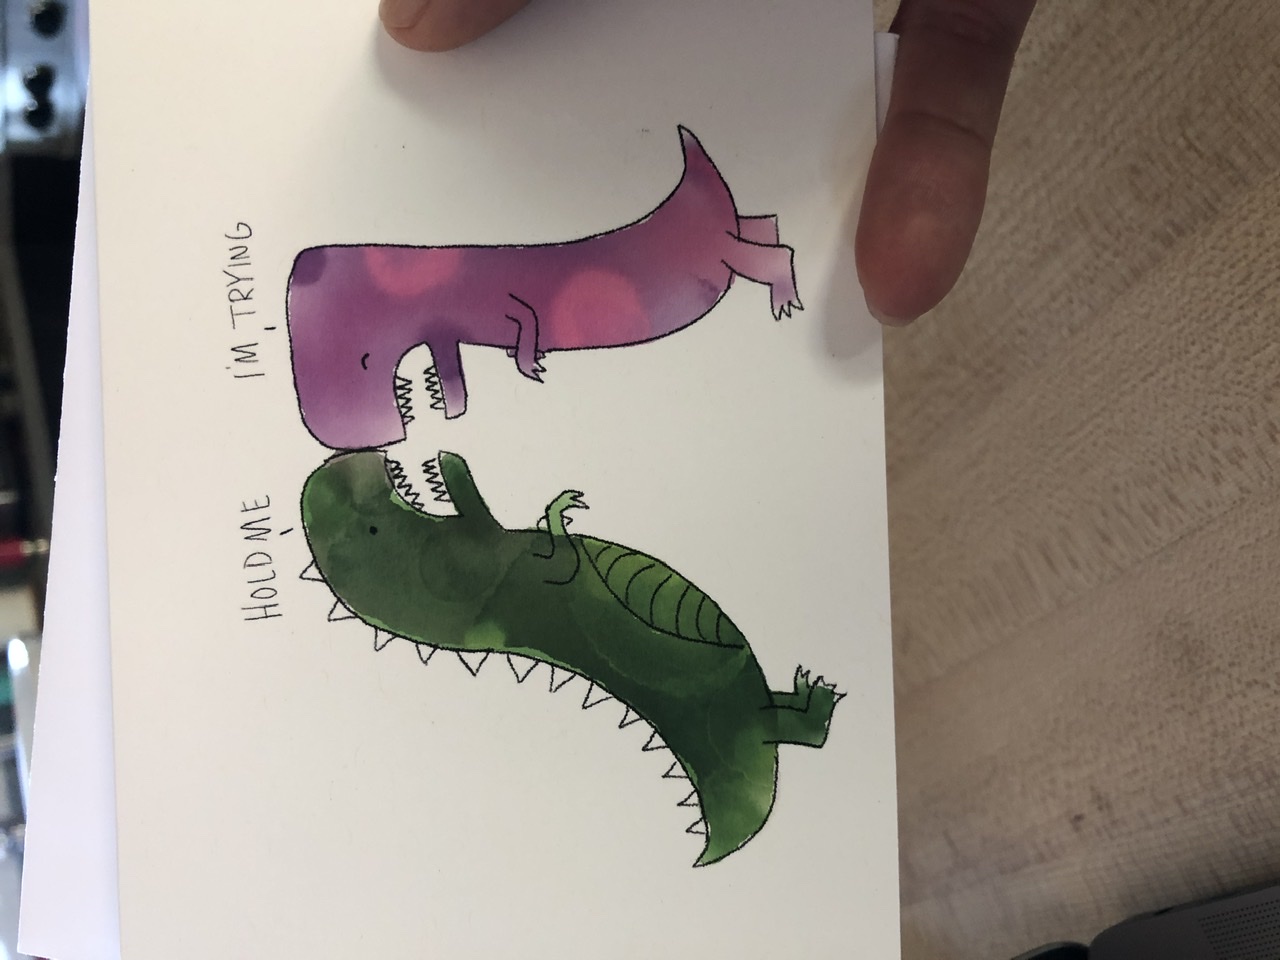 A greeting card showing two tiny armed dinosaurs trying to hug 